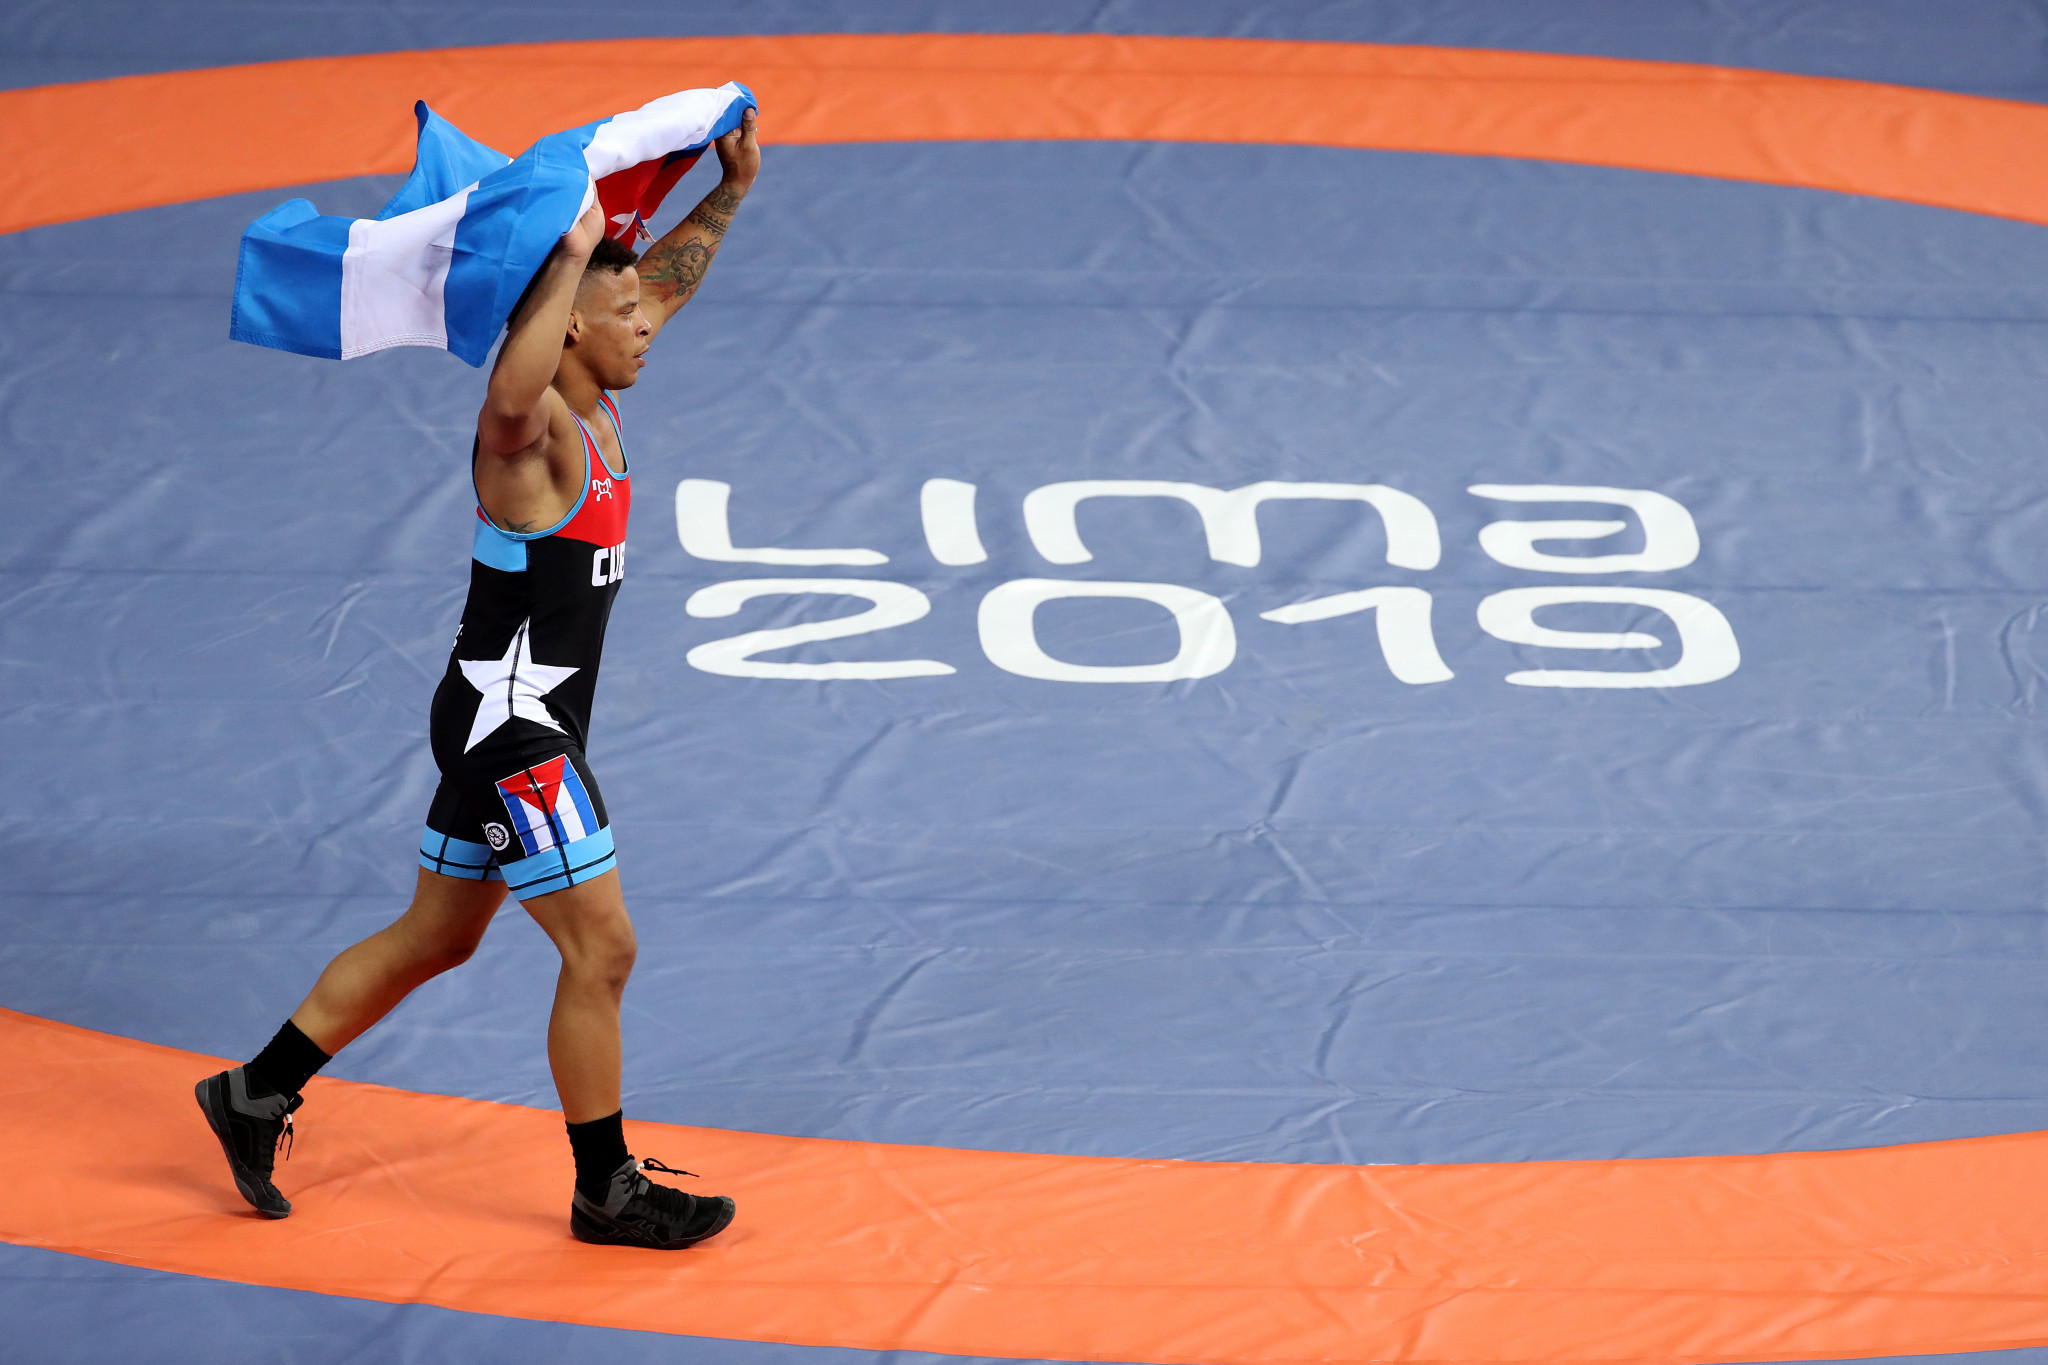 Ismael Borrero earned World Championship and Pan American Games gold medals in 2019 ©Getty Images